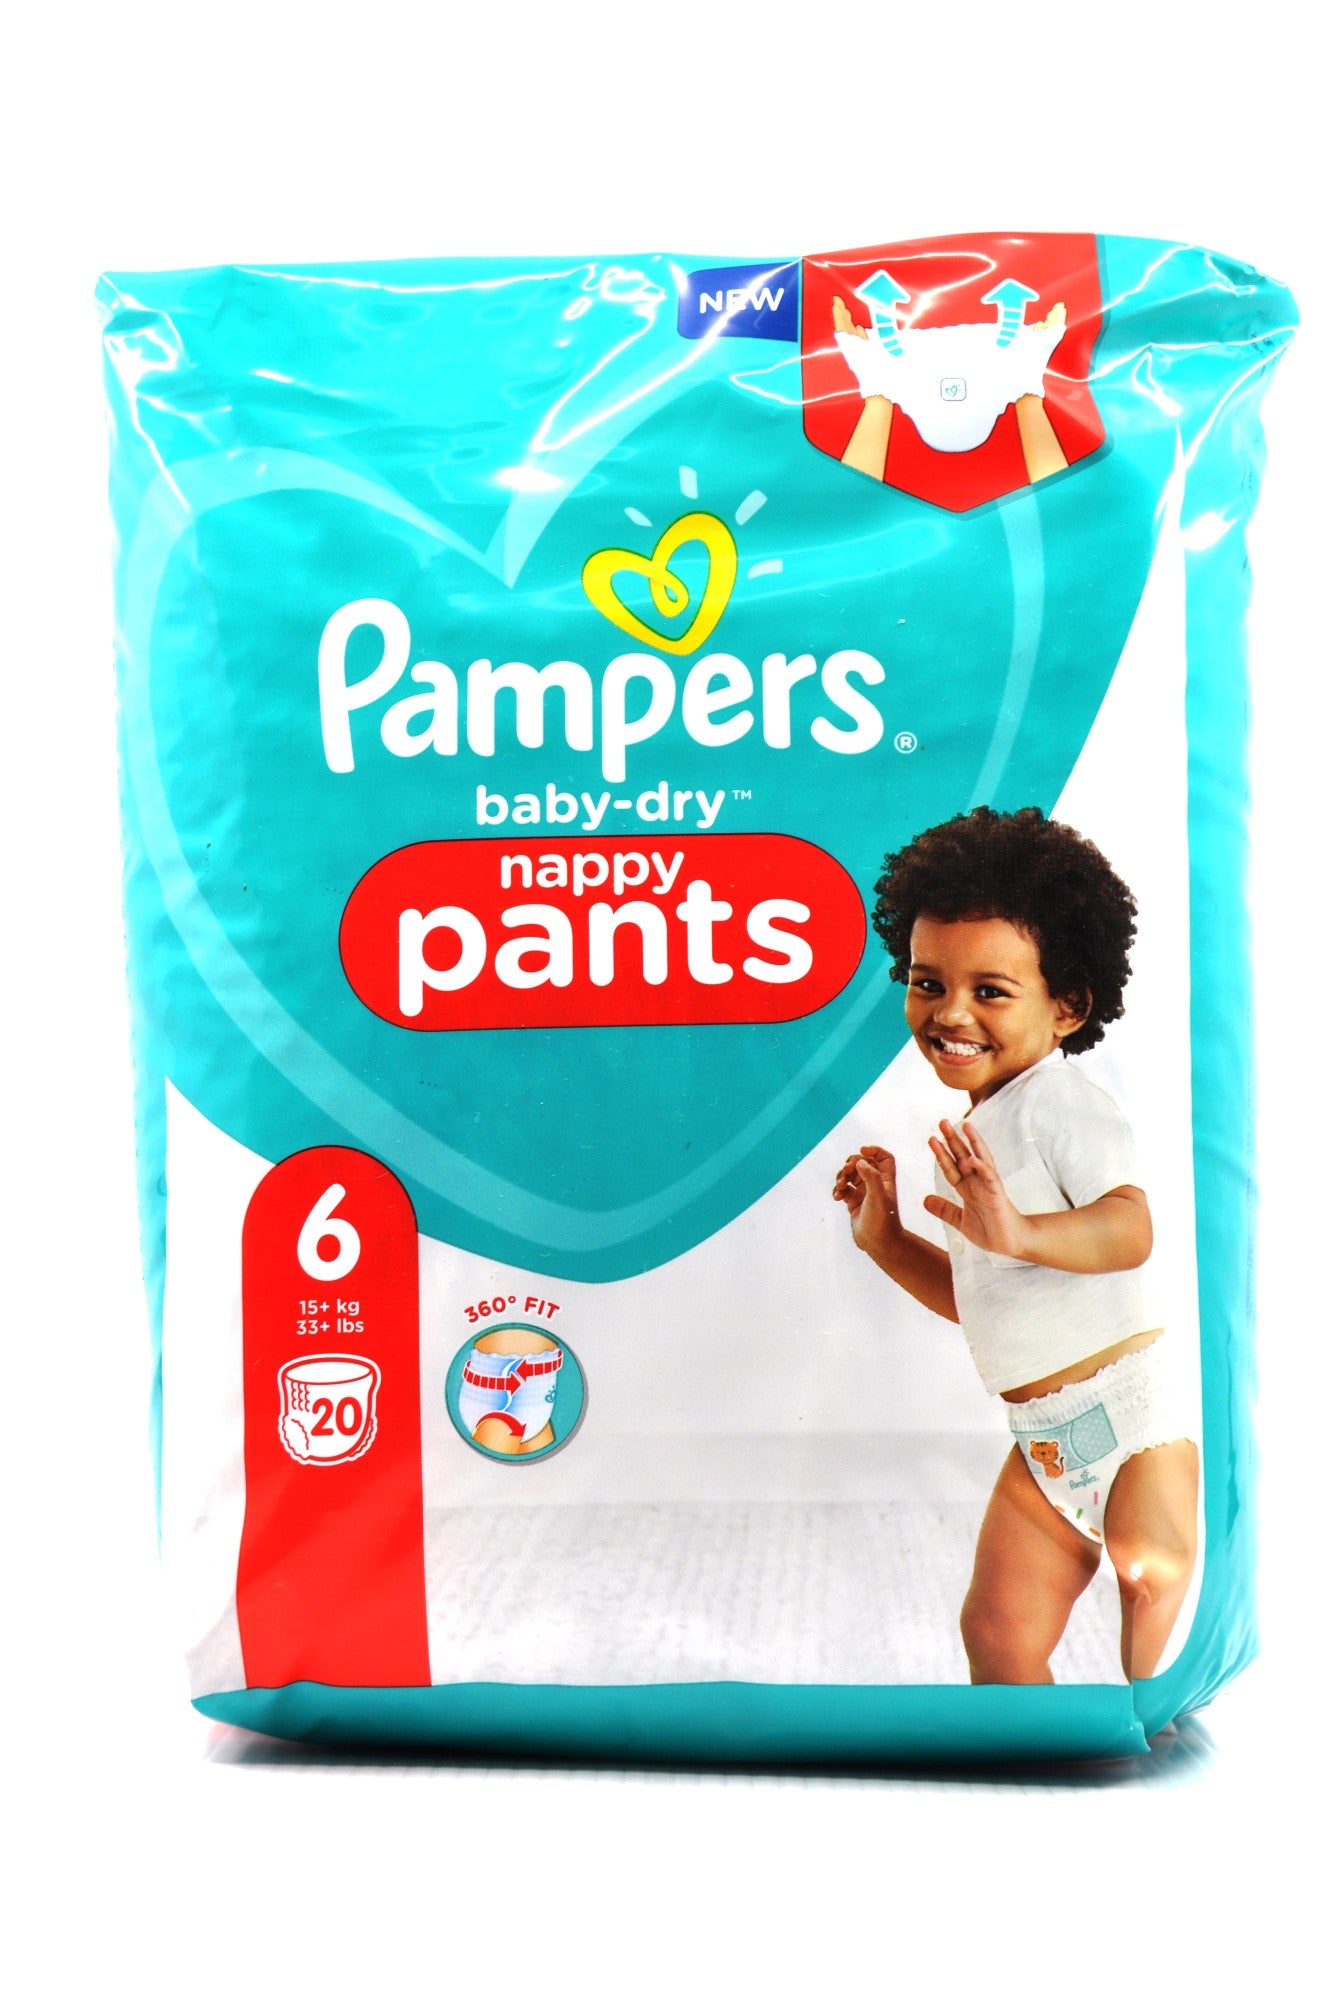 Magistraat Gymnast invoegen Buy Pampers Baby Dry Nappy Pants Size 6 online in qatar at best price –  MamaApp